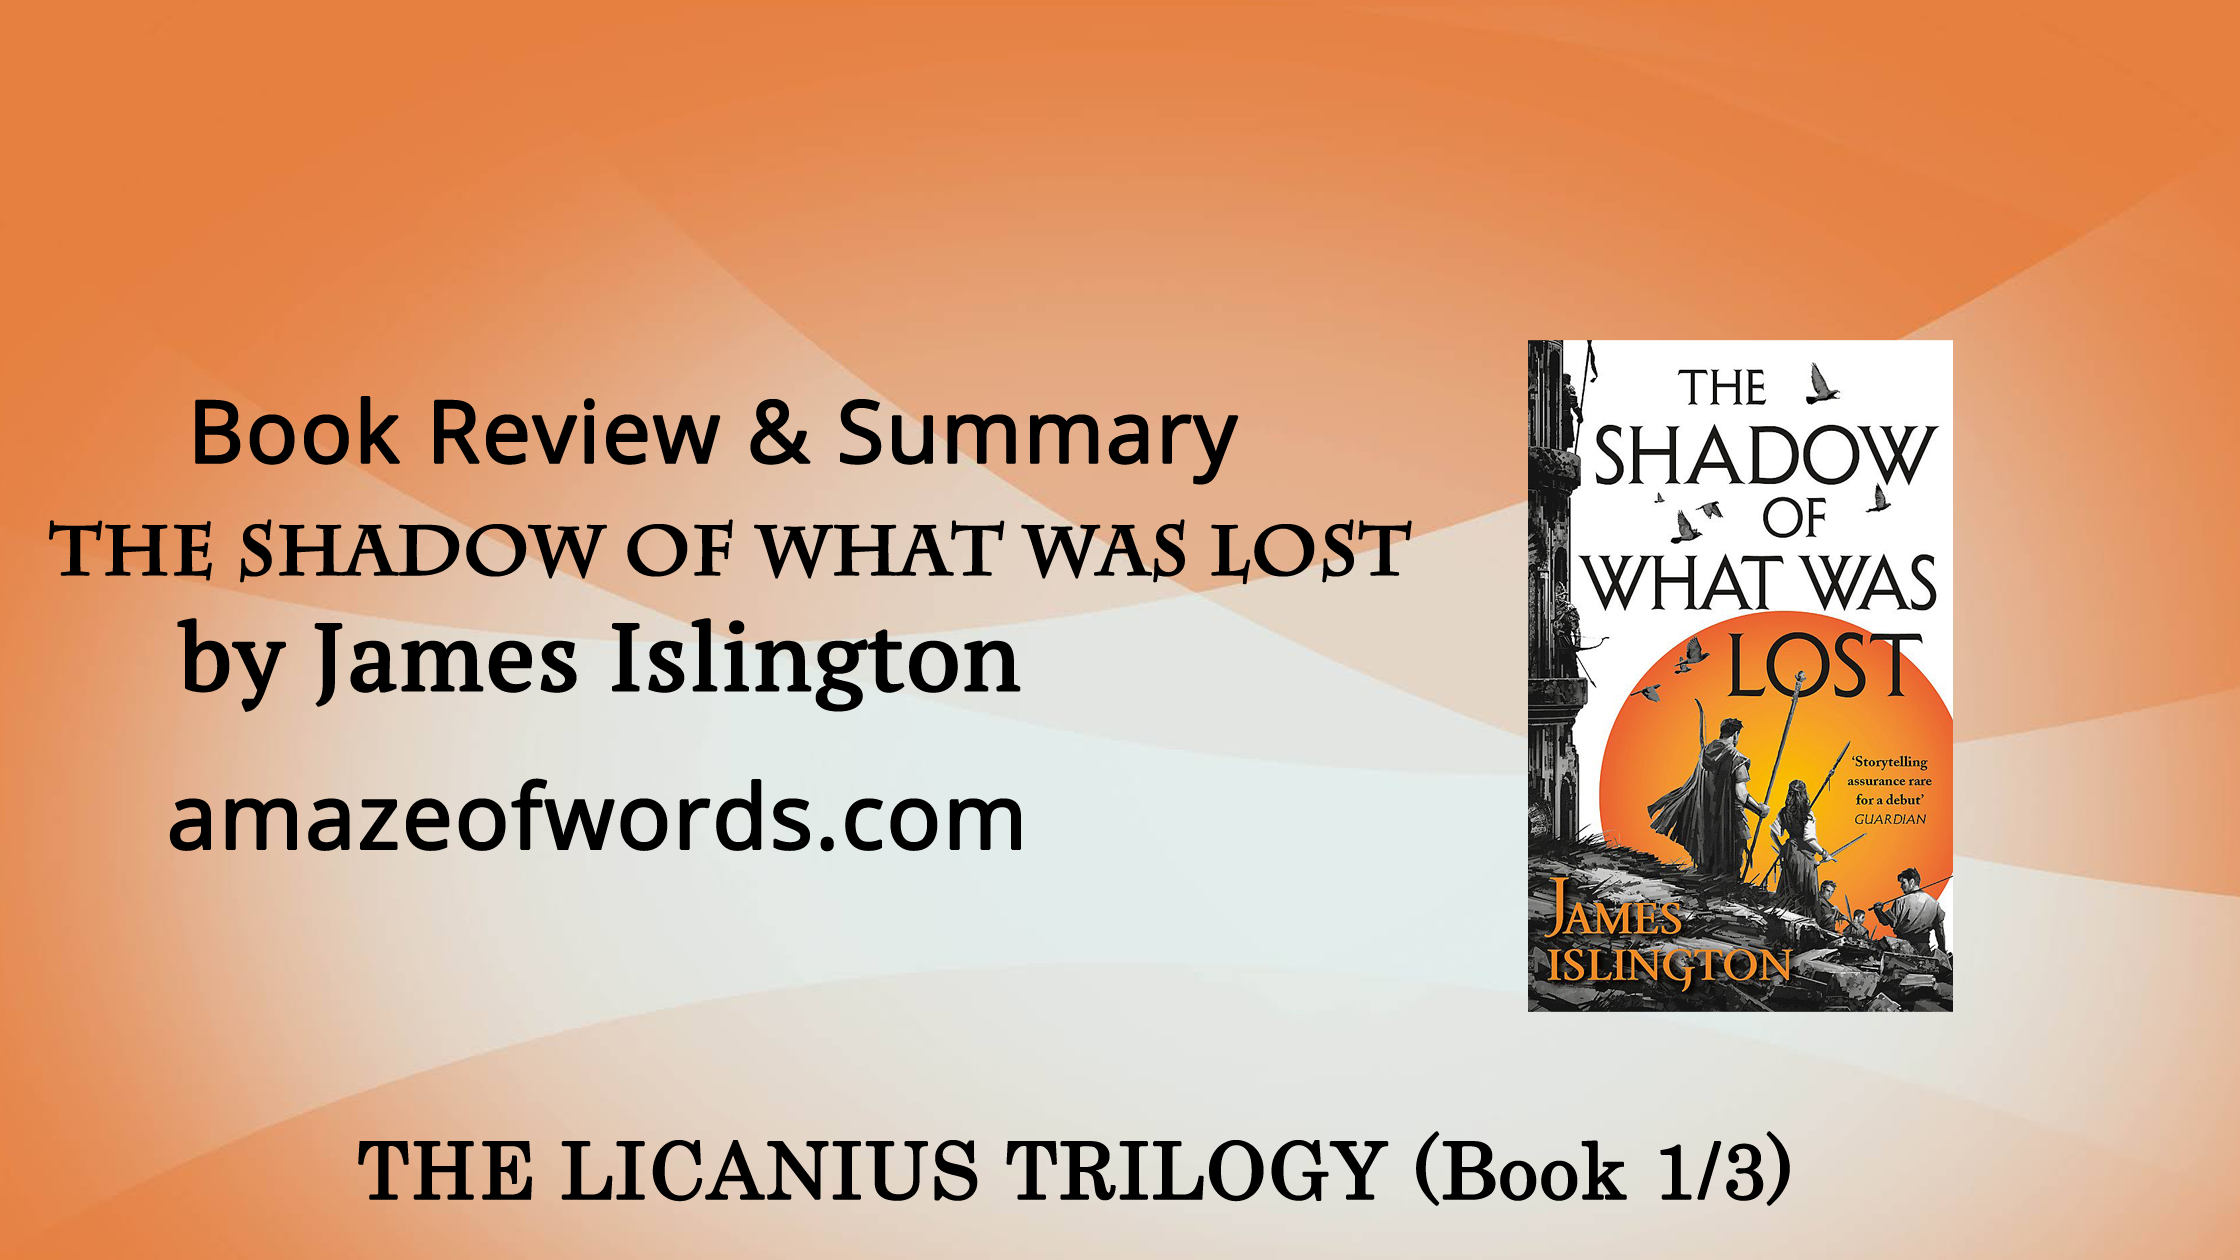 The Shadow of What Was Lost by James Islington — Book Review & Summary